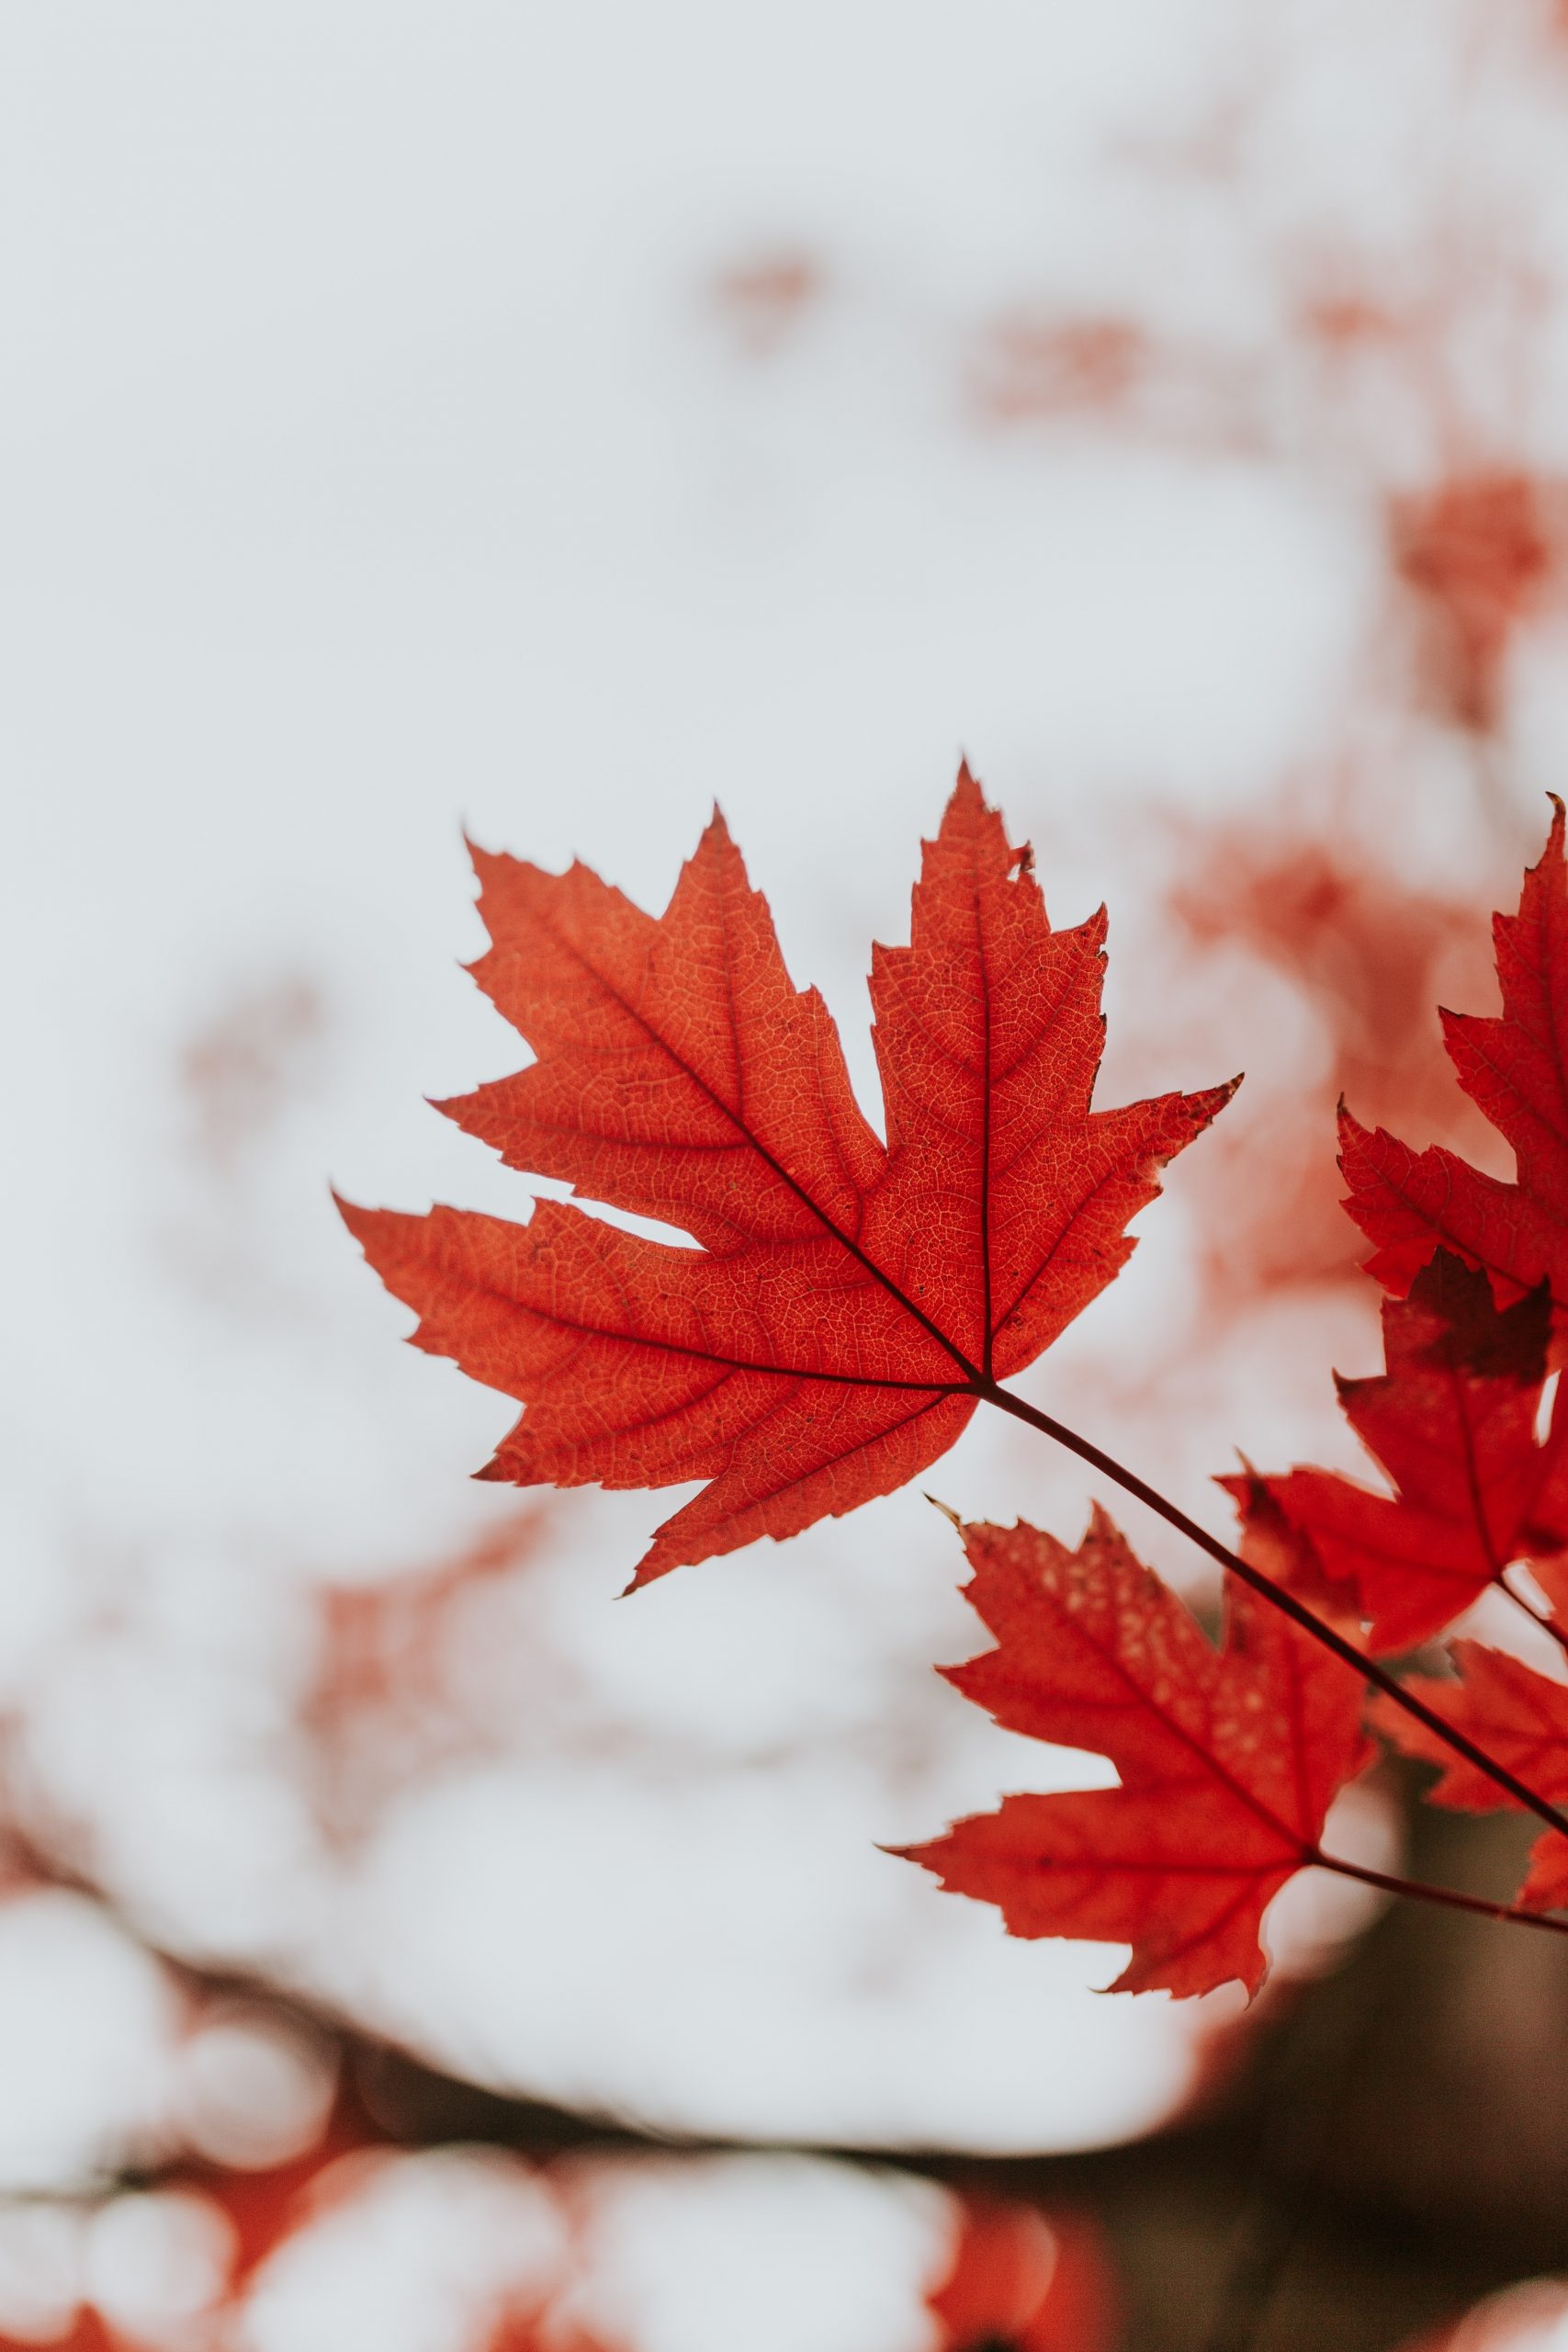 What Is A Chinese Maple? How Does It Differ From Other Maple Trees?